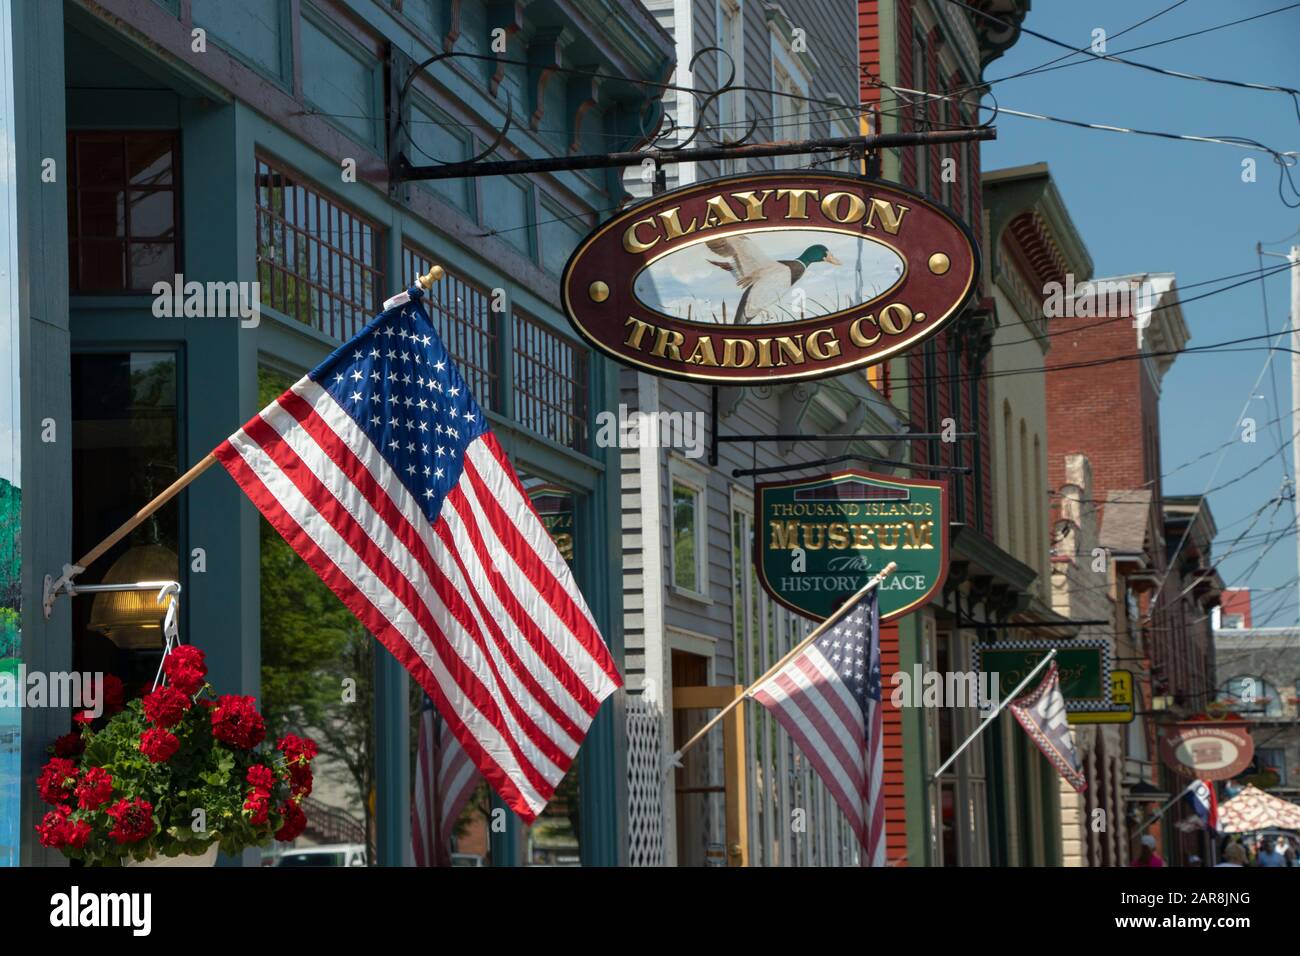 Clayton, NY, USA - July, 2019: Building Shop Facade on James St during summer season, American flags and Iron wooden store signboards Stock Photo